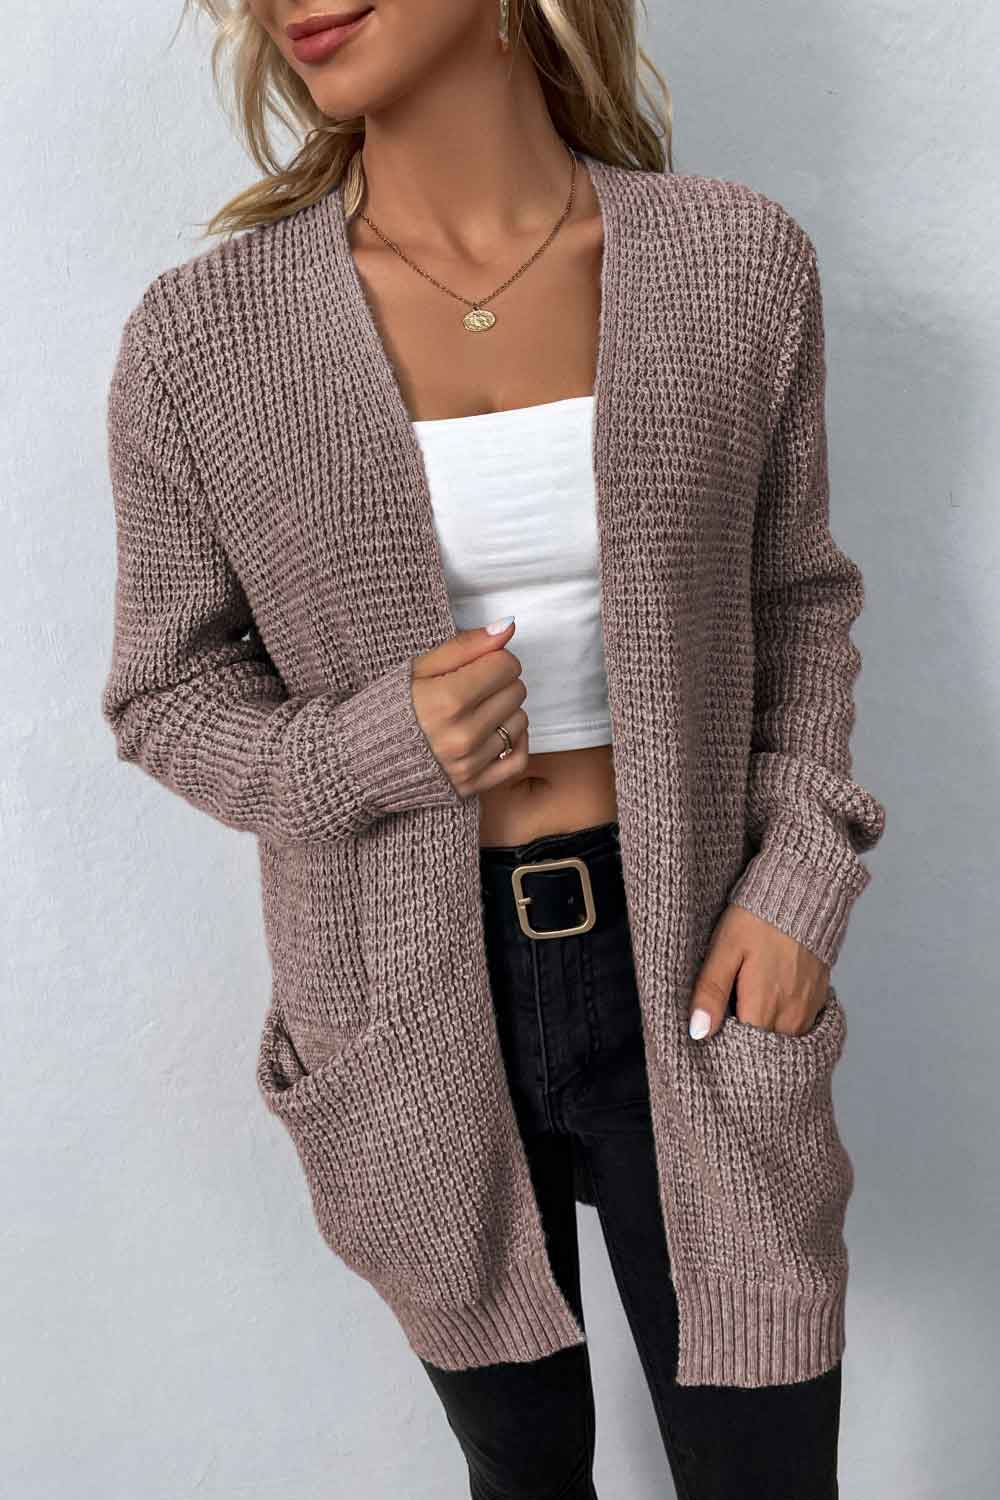 Rib-Knit Open Front Pocketed Cardigan - Women’s Clothing & Accessories - Shirts & Tops - 22 - 2024